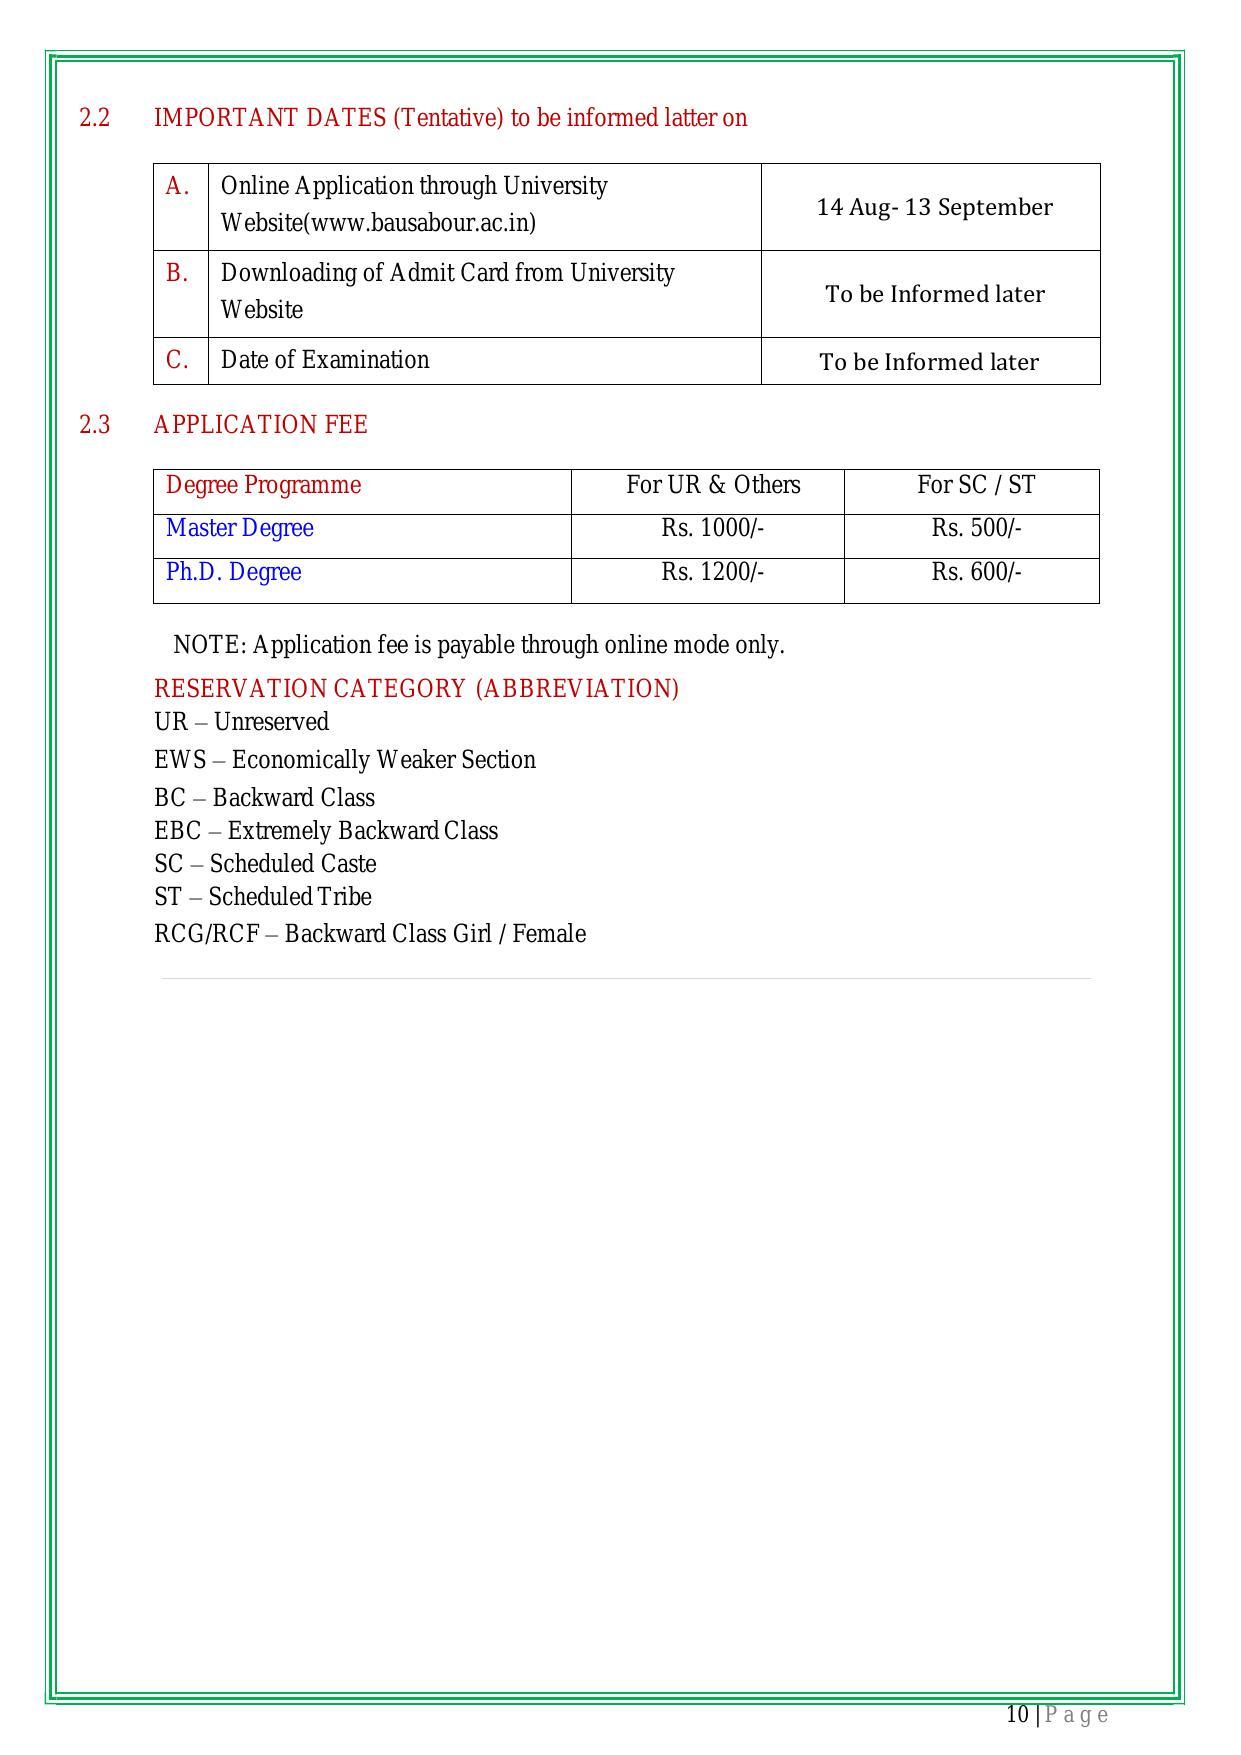 Bihar Agricultural University PG Entrance Exam - Page 11